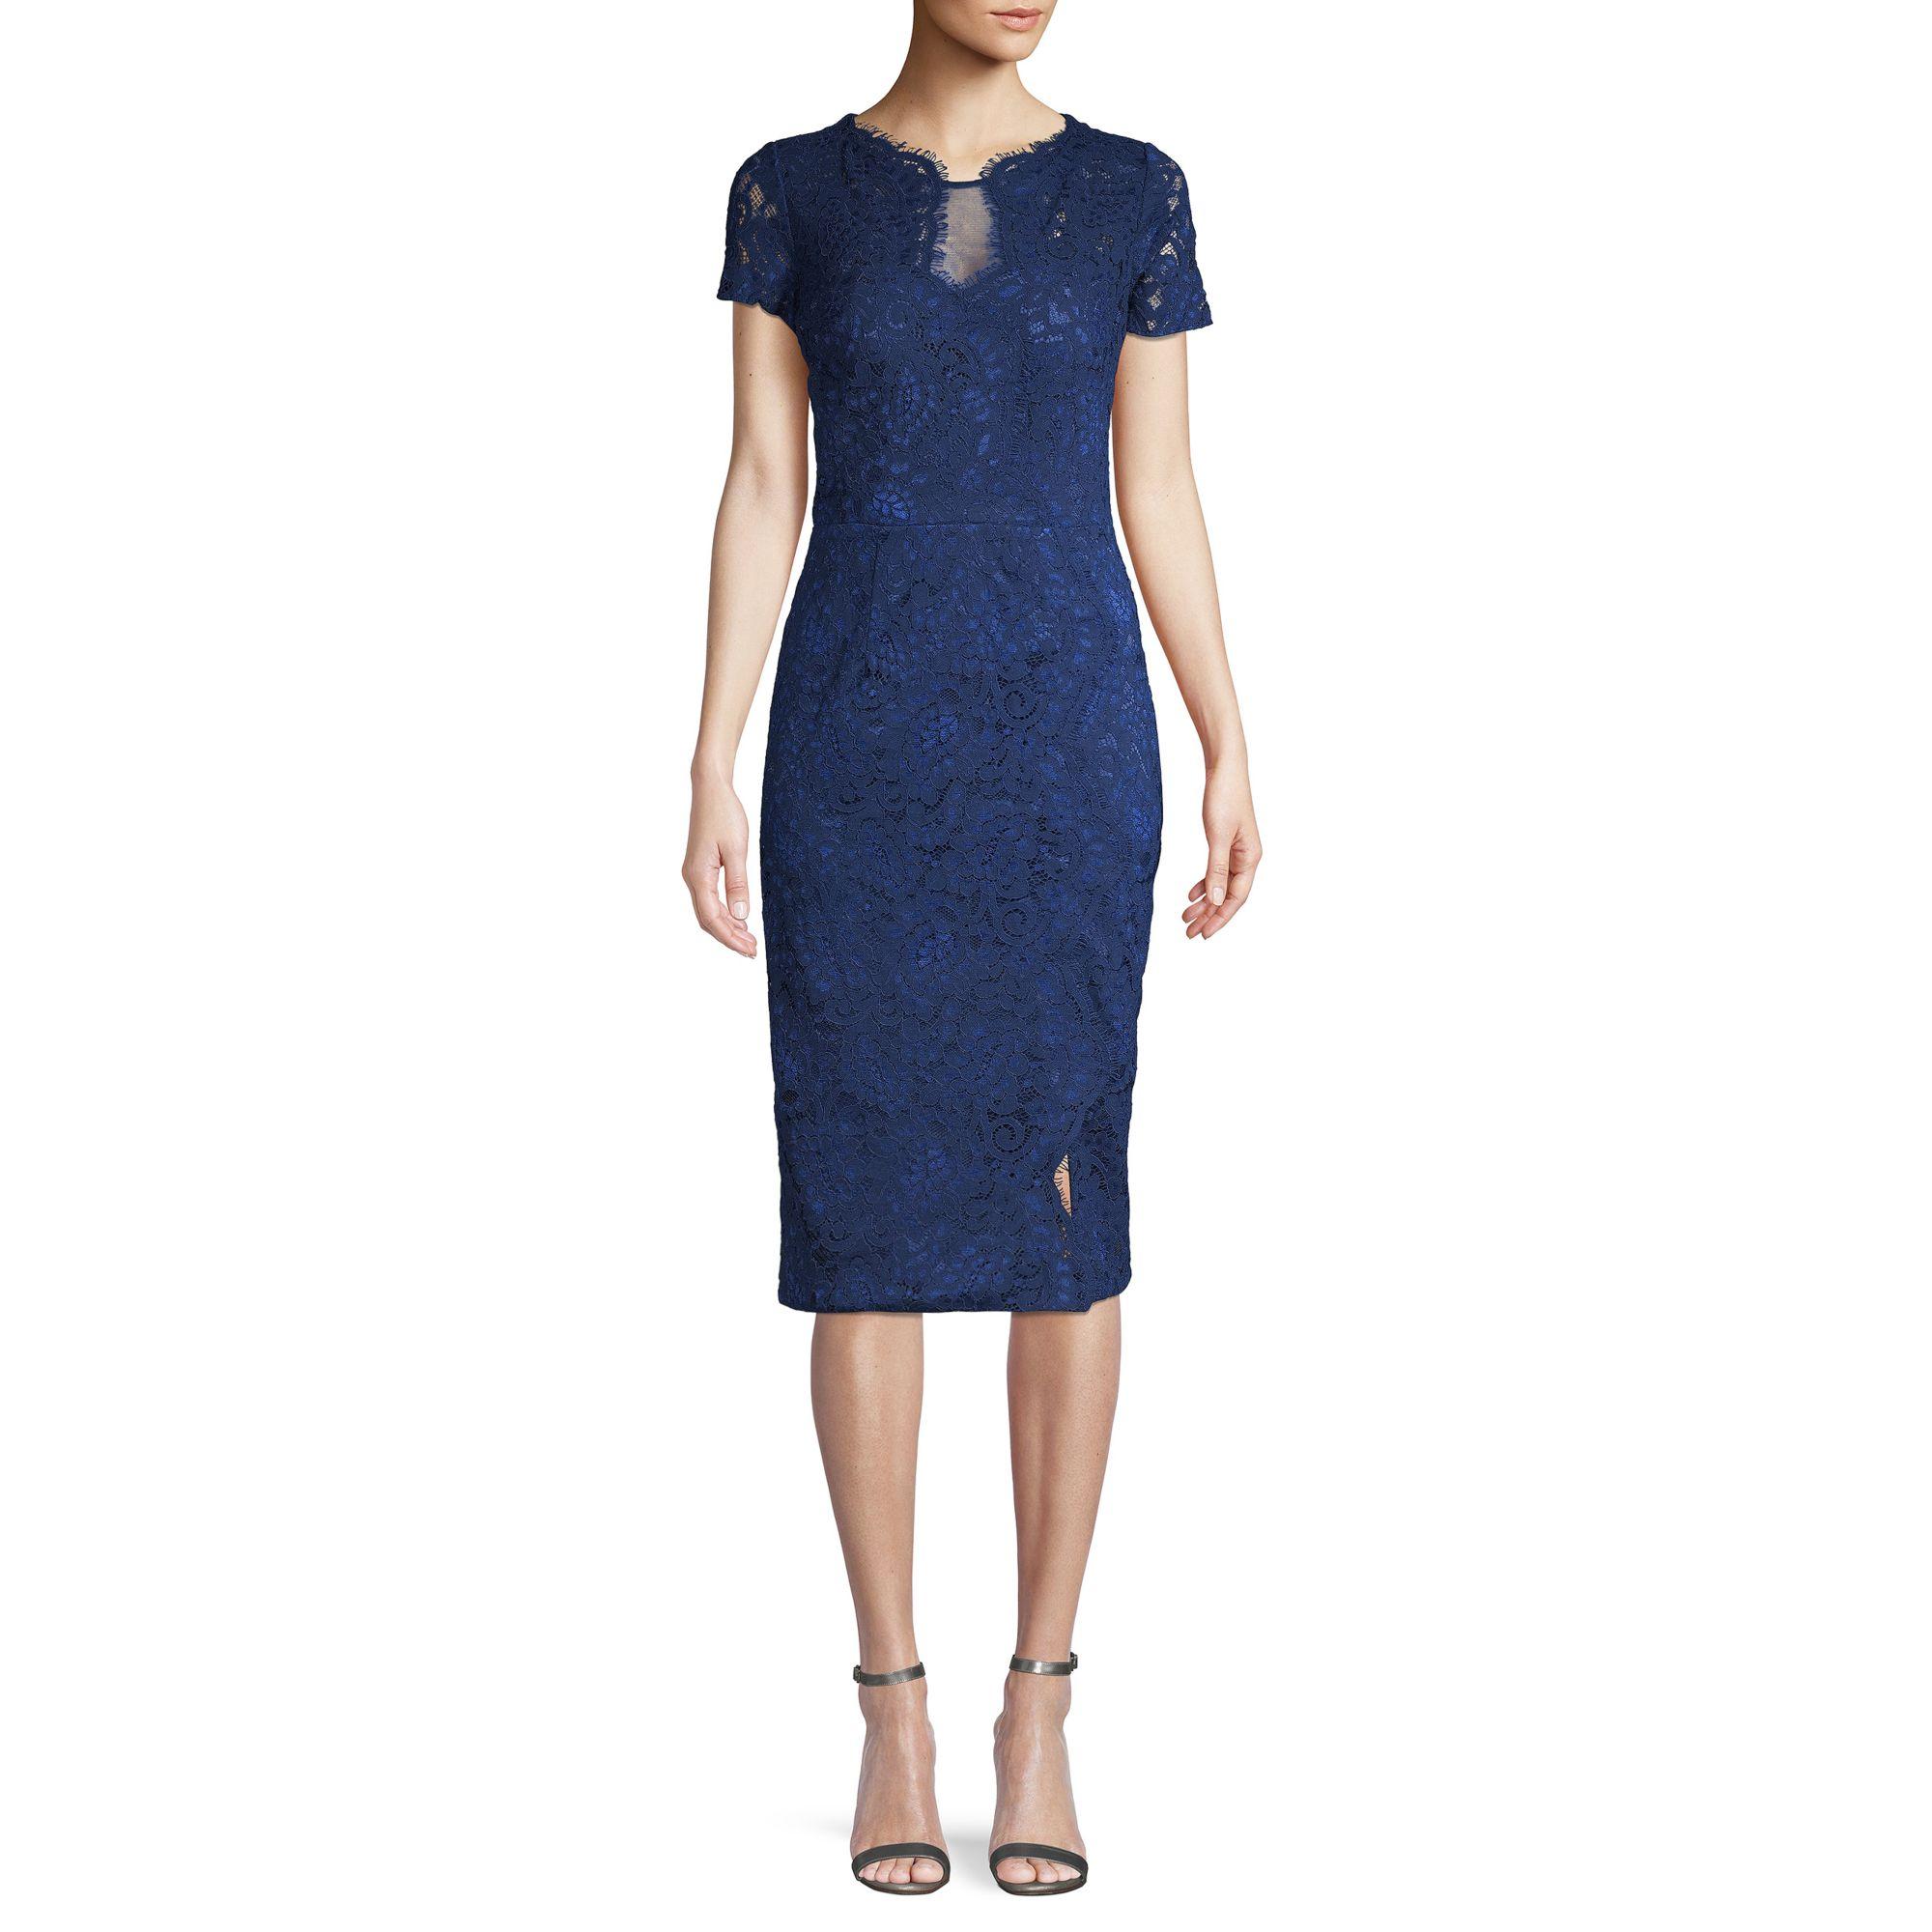 JS Collections Lace Short-sleeve Sheath Dress in Navy (Blue) - Lyst